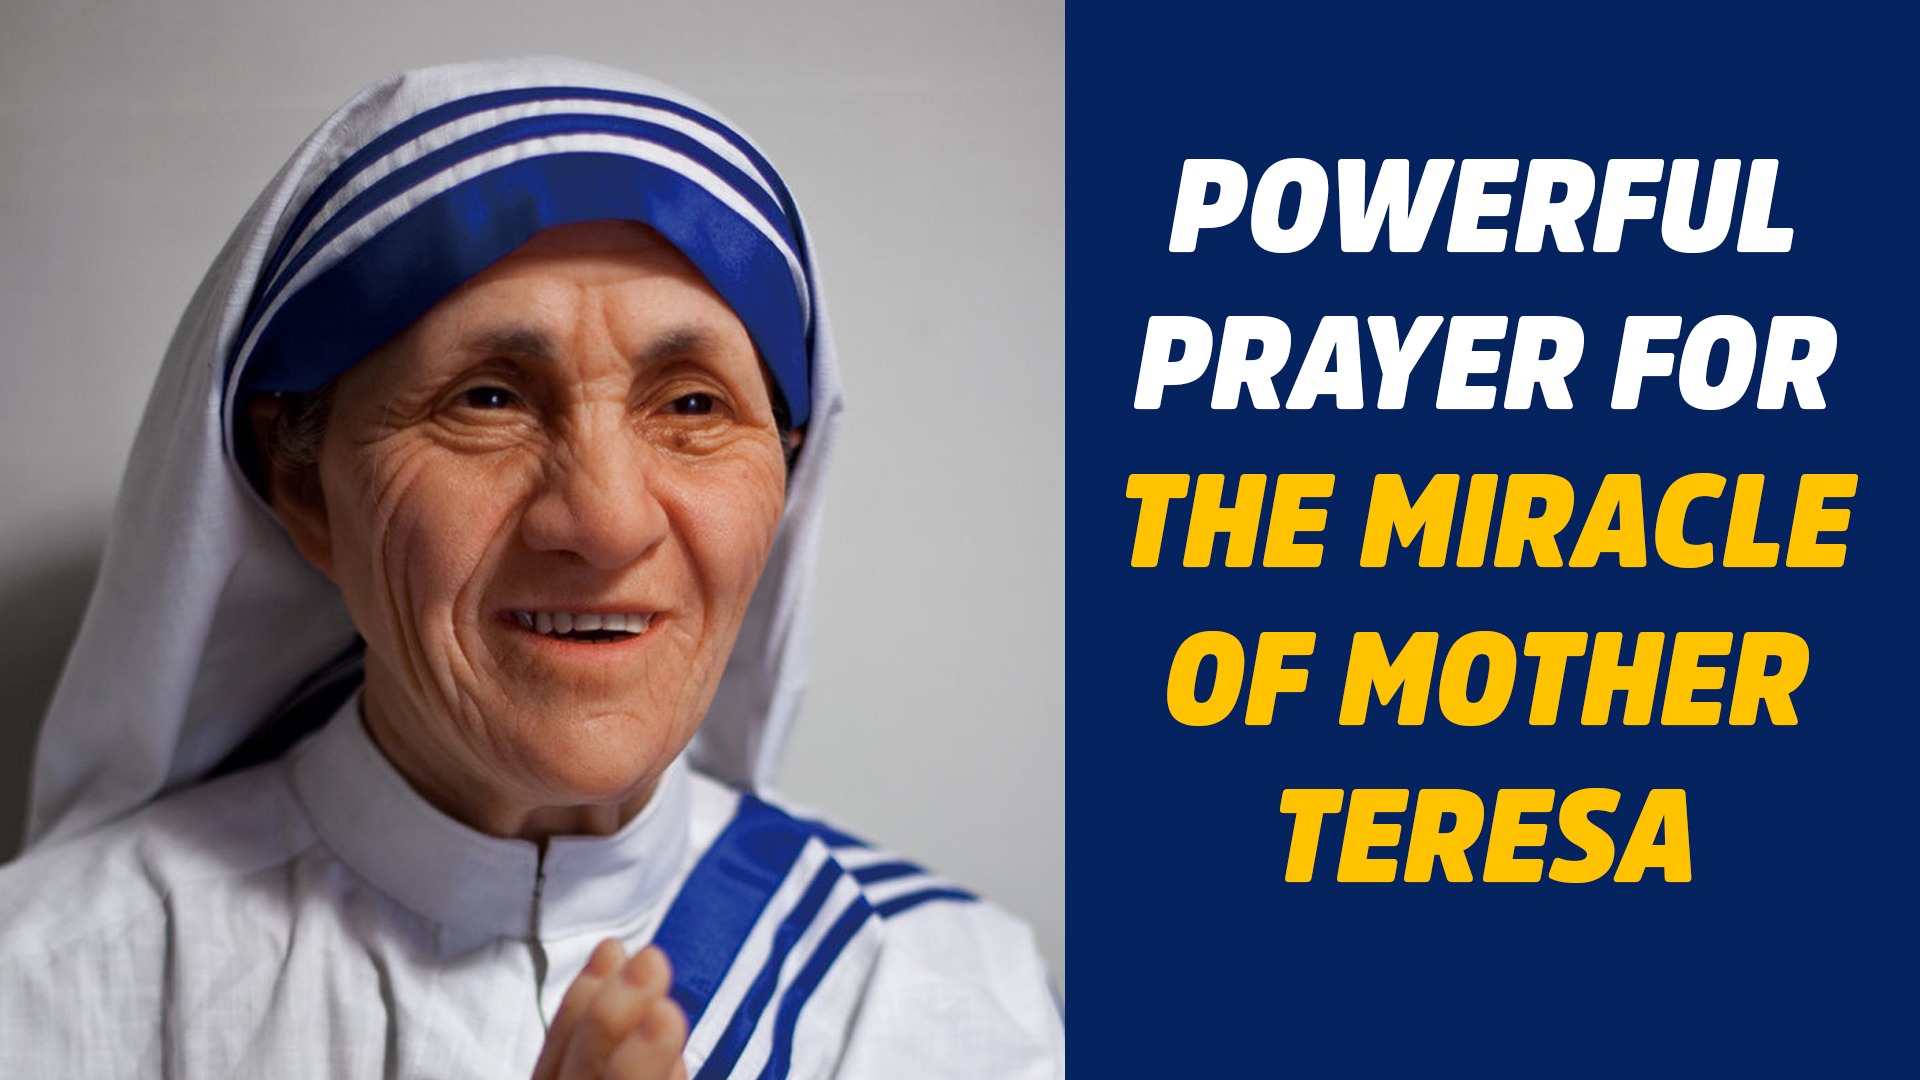 Ask and Receive the Great Miracle of the Holy Mother Teresa into Your Life with this Powerful Prayer